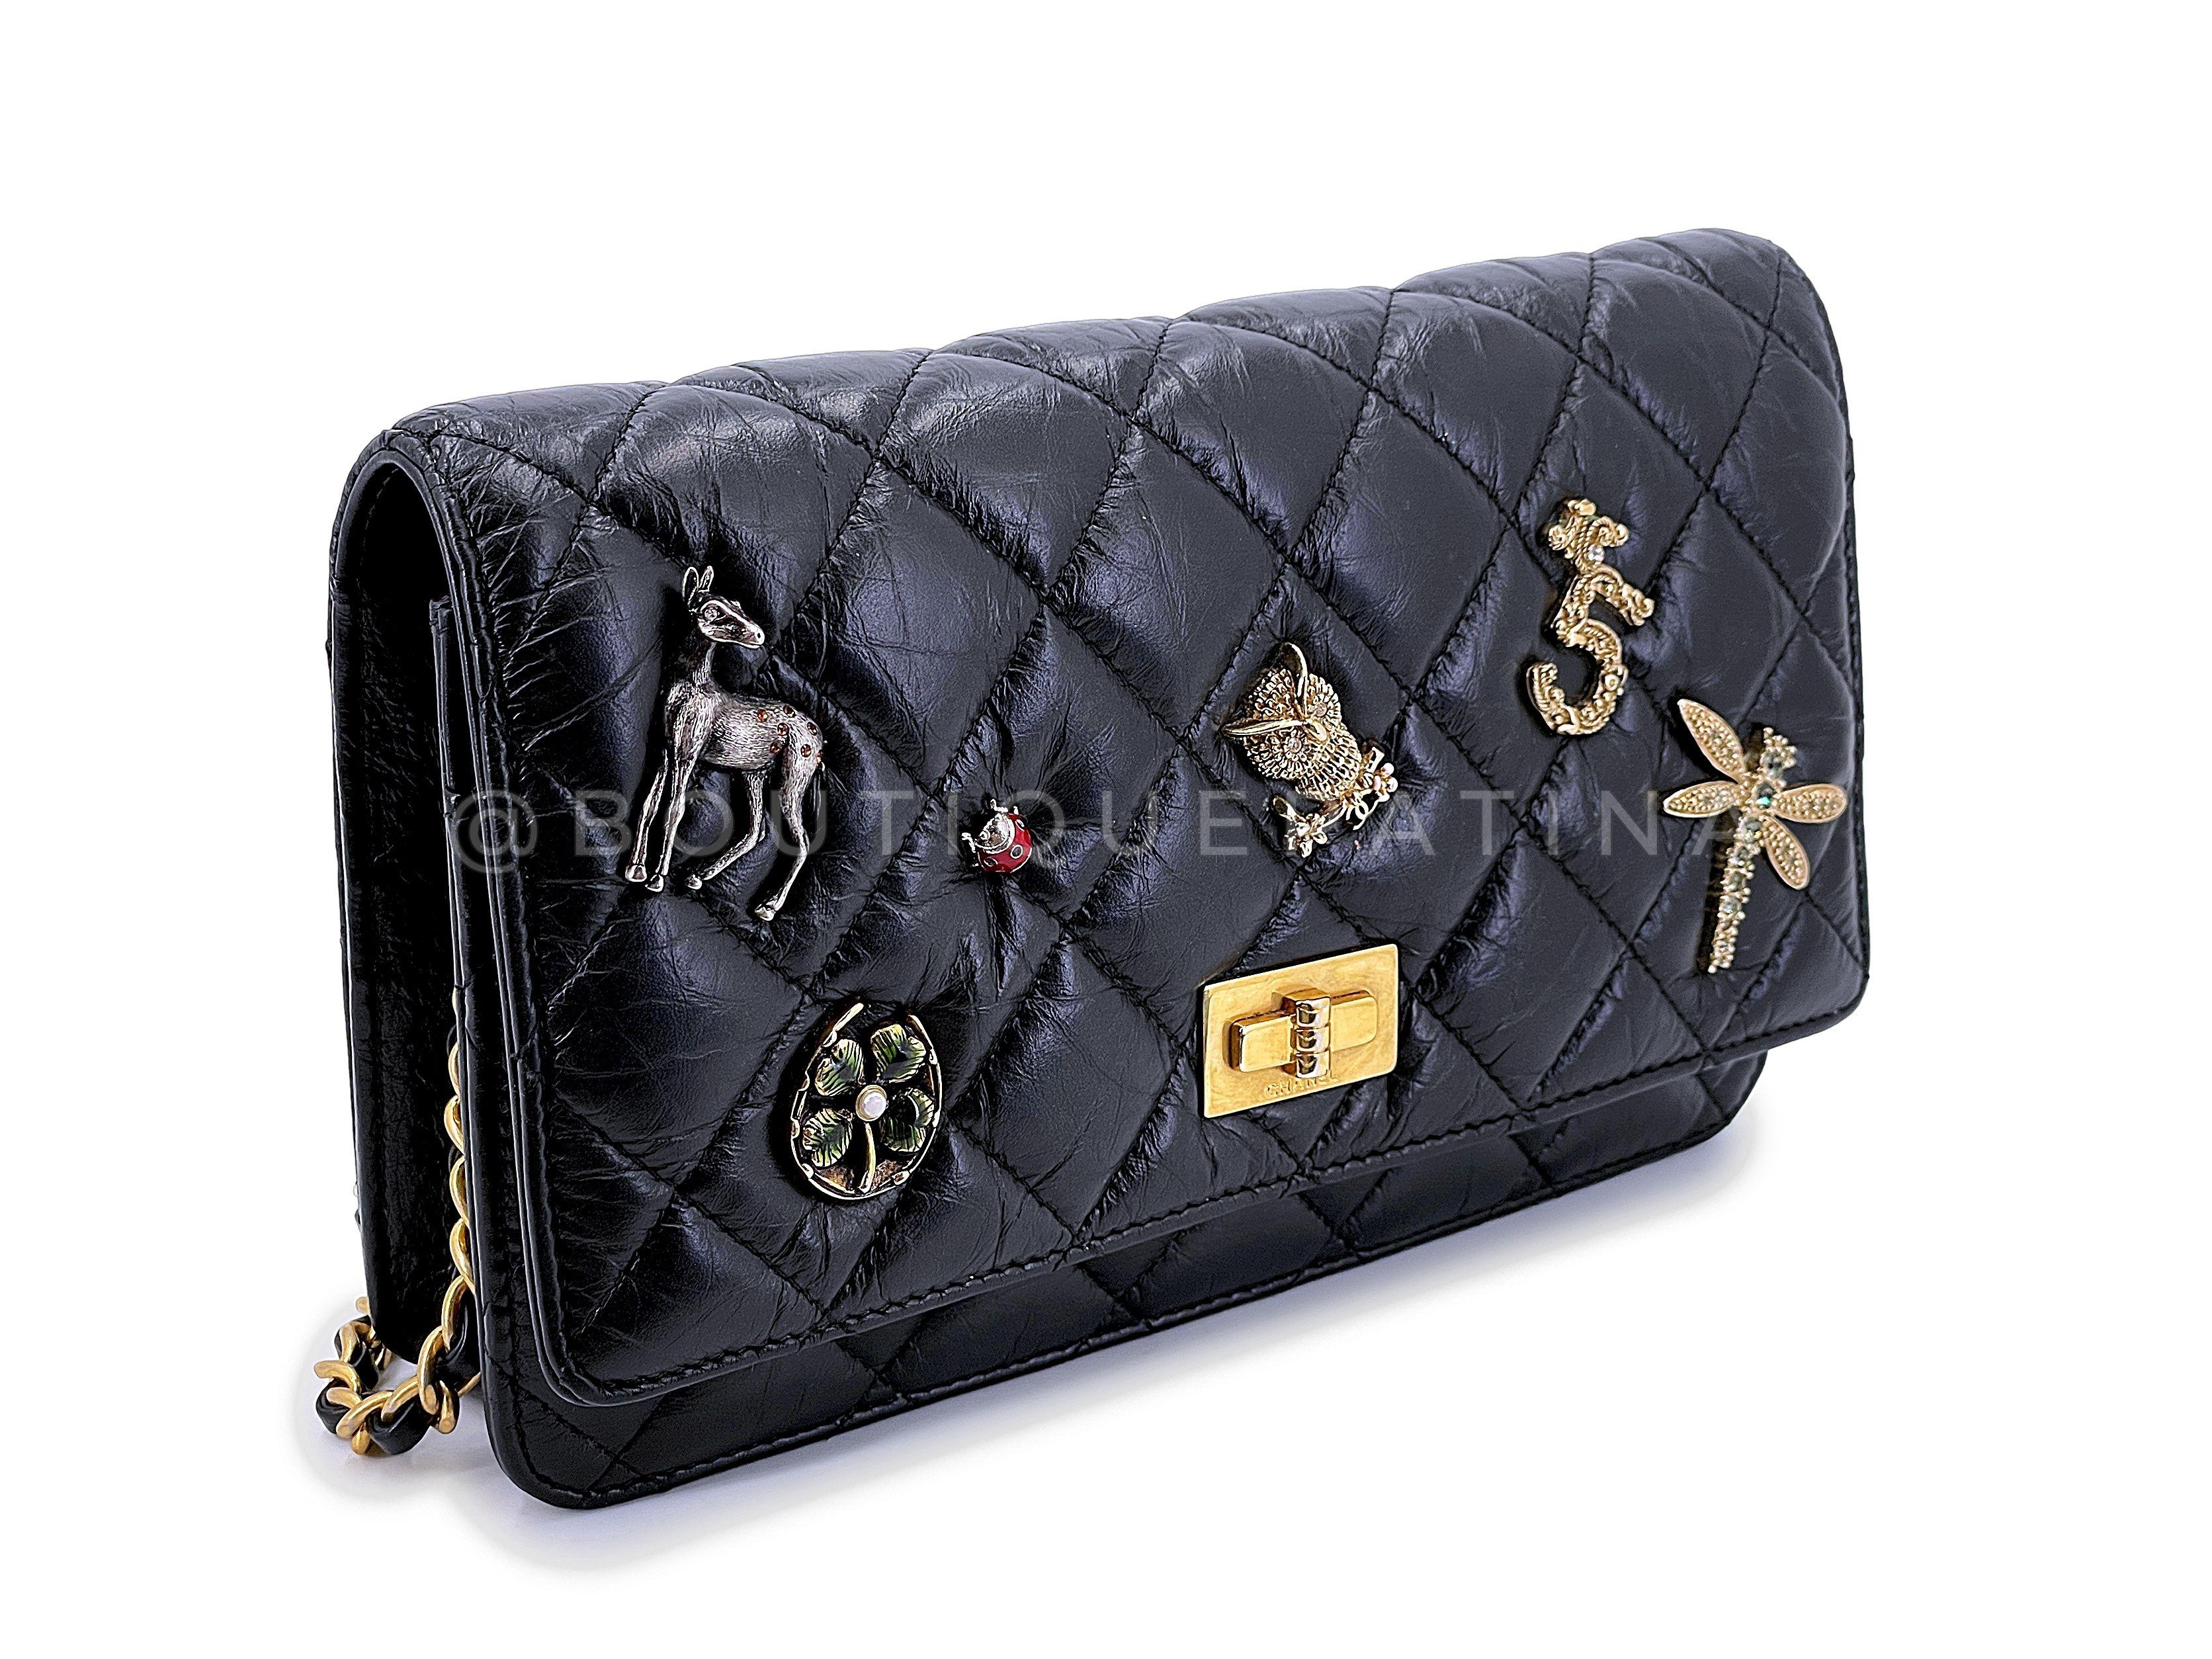 17P Chanel Black Lucky Charms Reissue WOC Wallet on Chain Bag 67604 In Excellent Condition For Sale In Costa Mesa, CA